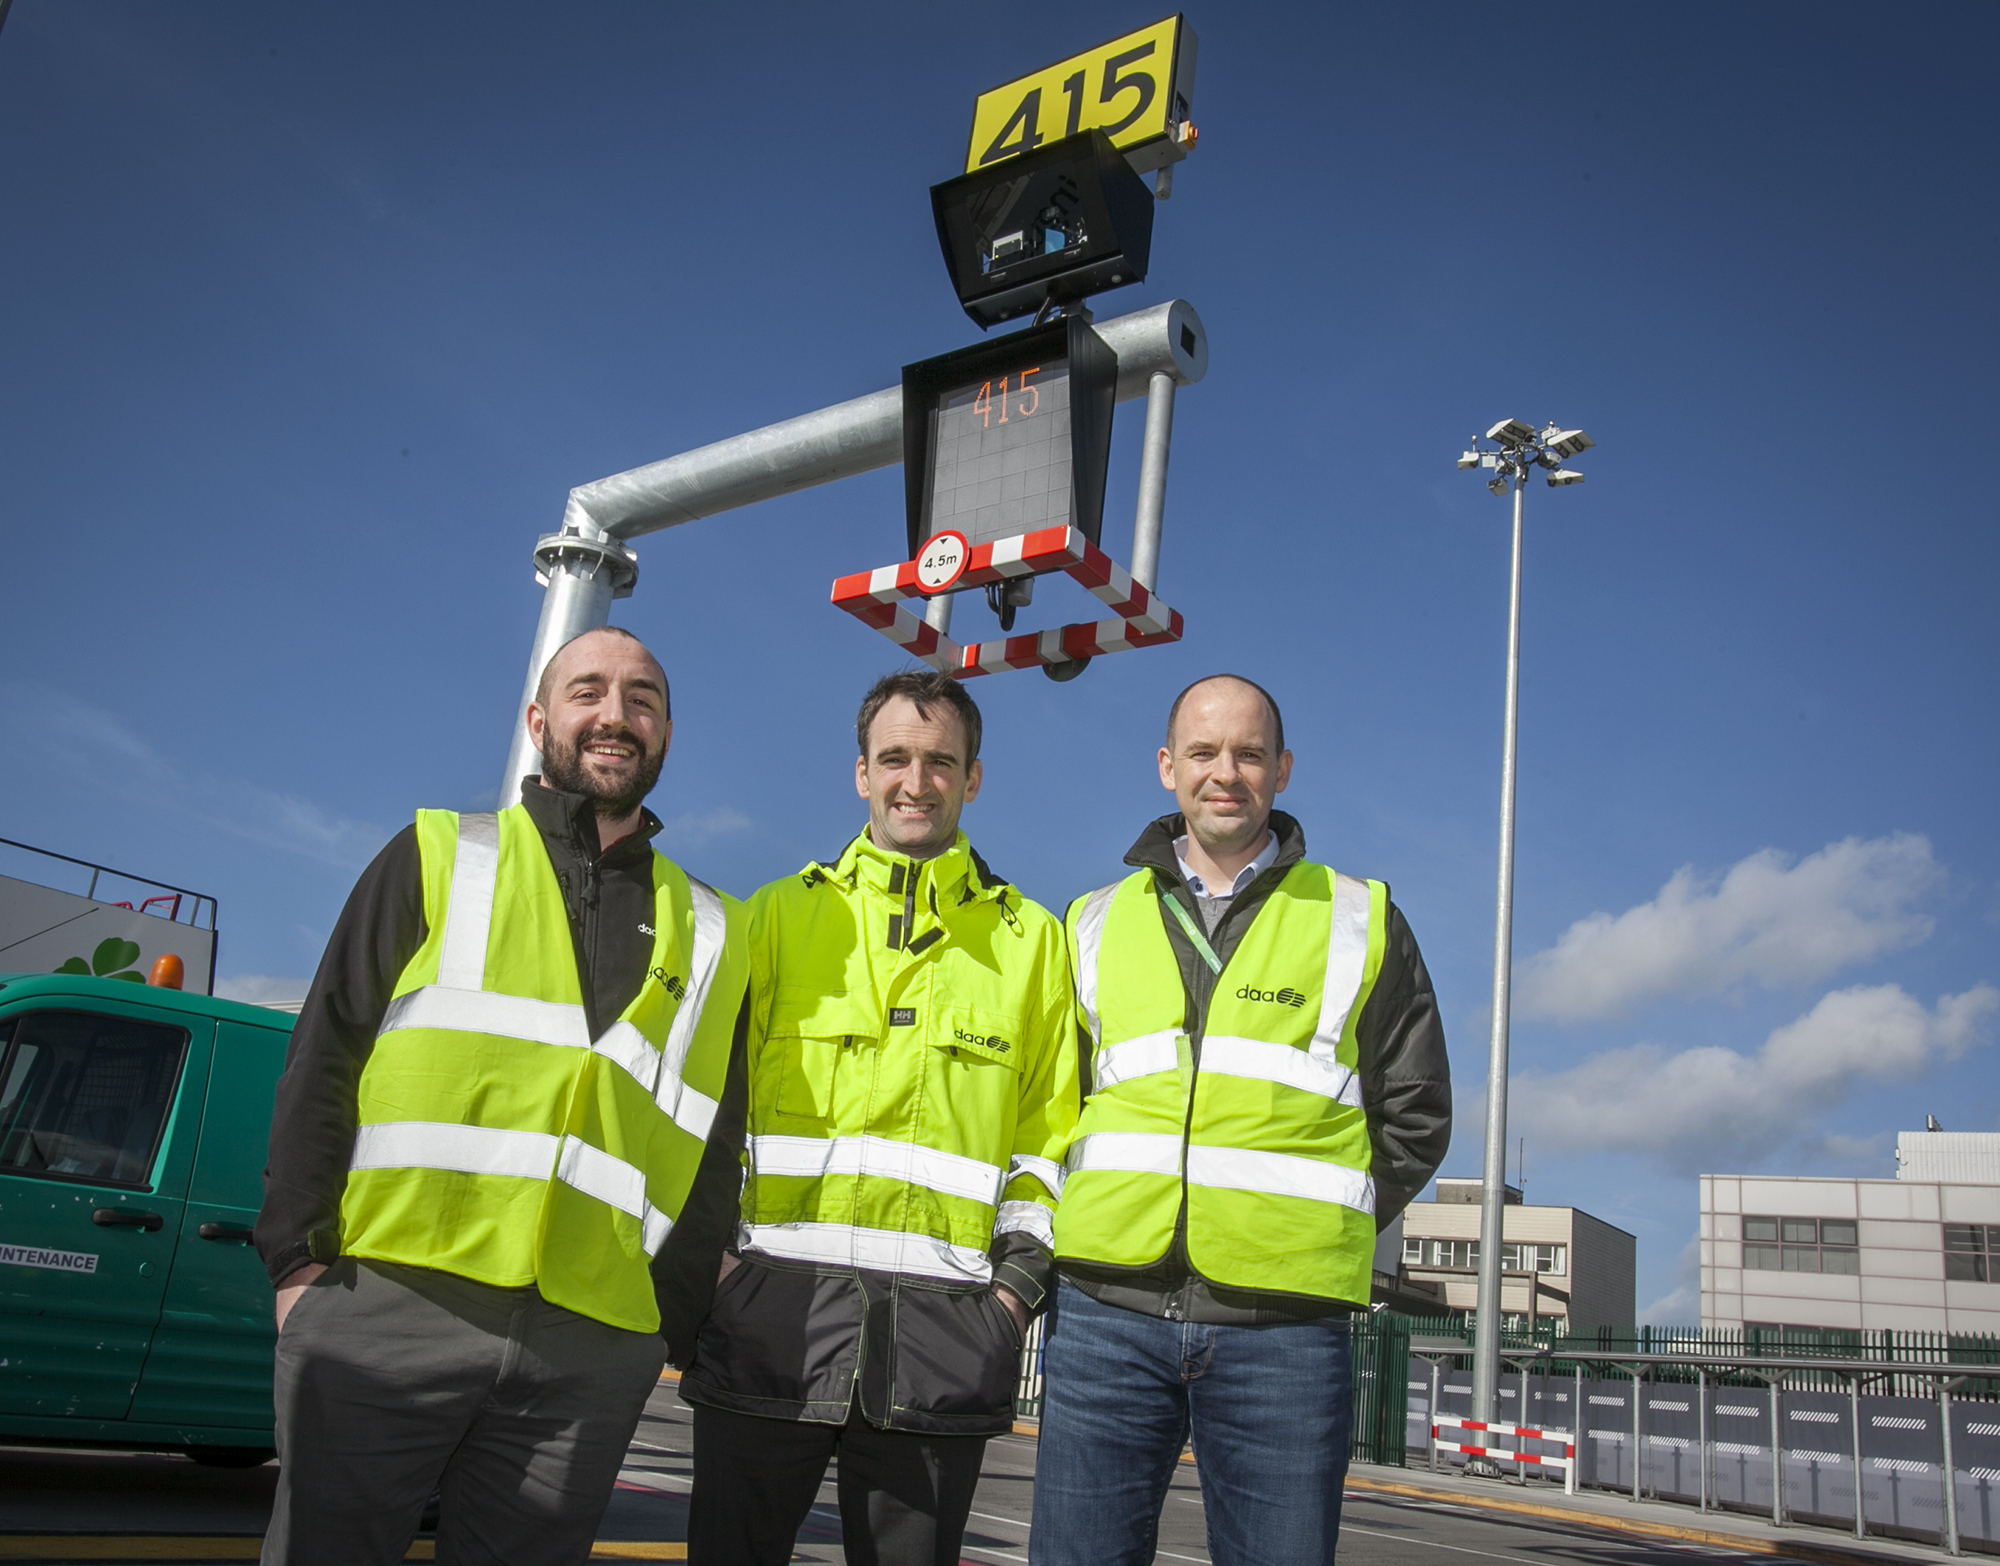 Mark O’Connor, Project Manager, Asset Management and Development Dublin Airport; Conor Carroll, Client Project Owner, Asset Care, Dublin Airport and Dan Davis, Senior Project Manager IT, Dublin Airport pictured with the new AVDGS in Dublin Airport.